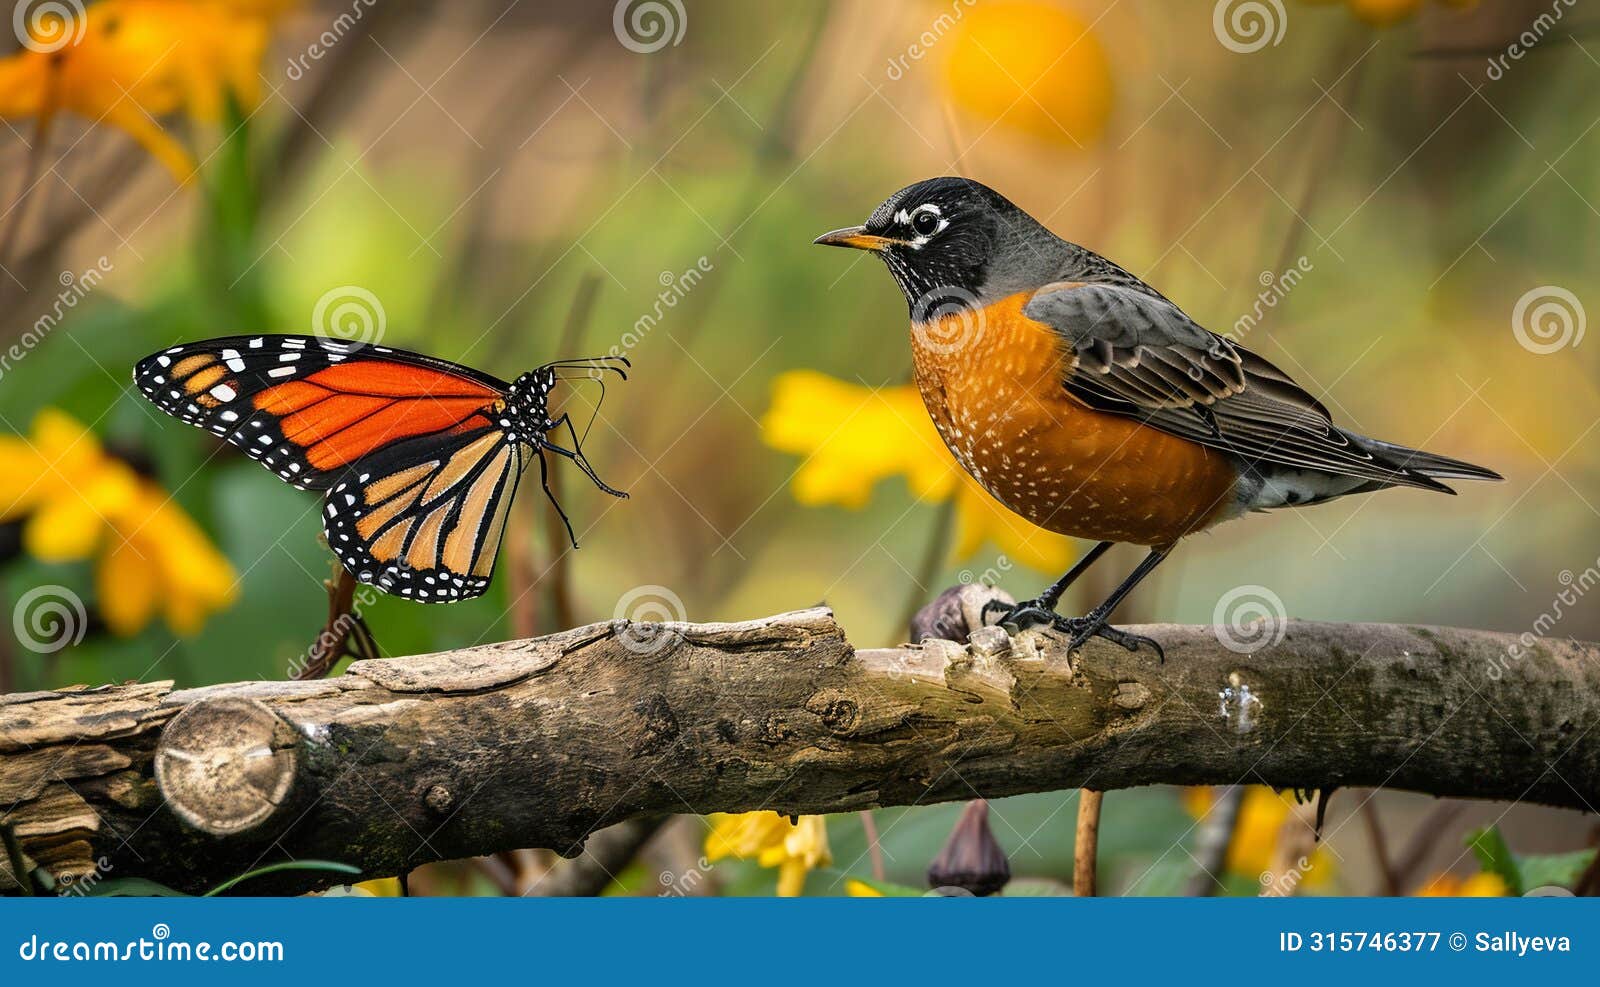 a wild robin with stunning colourful and a monarch butterfly standing on a branch